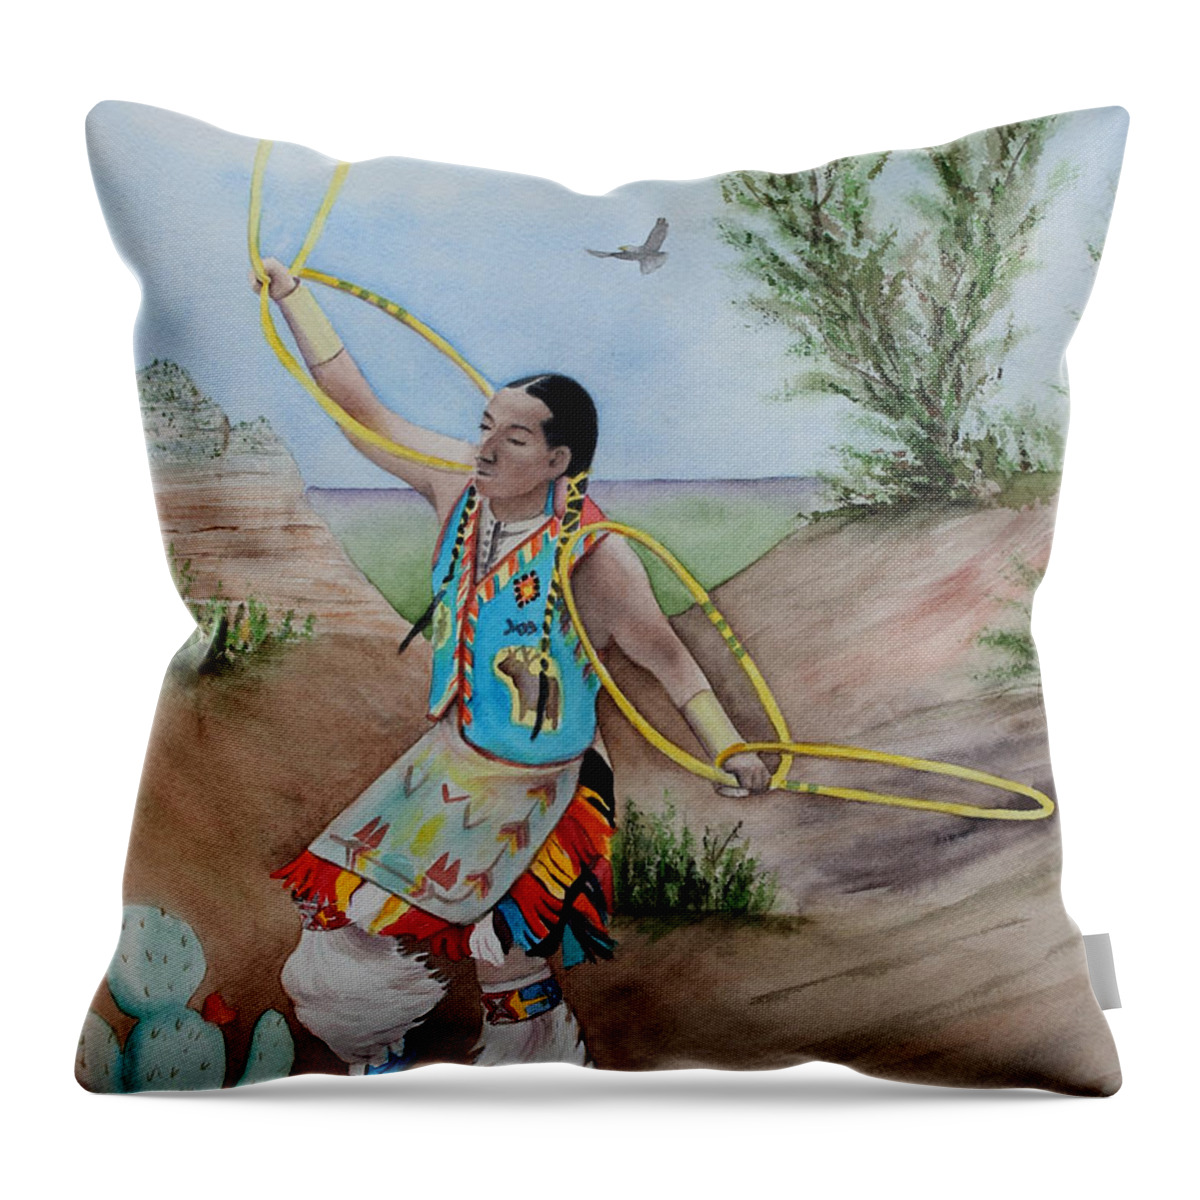 Native American Throw Pillow featuring the painting The Storyteller by Kelly Miyuki Kimura